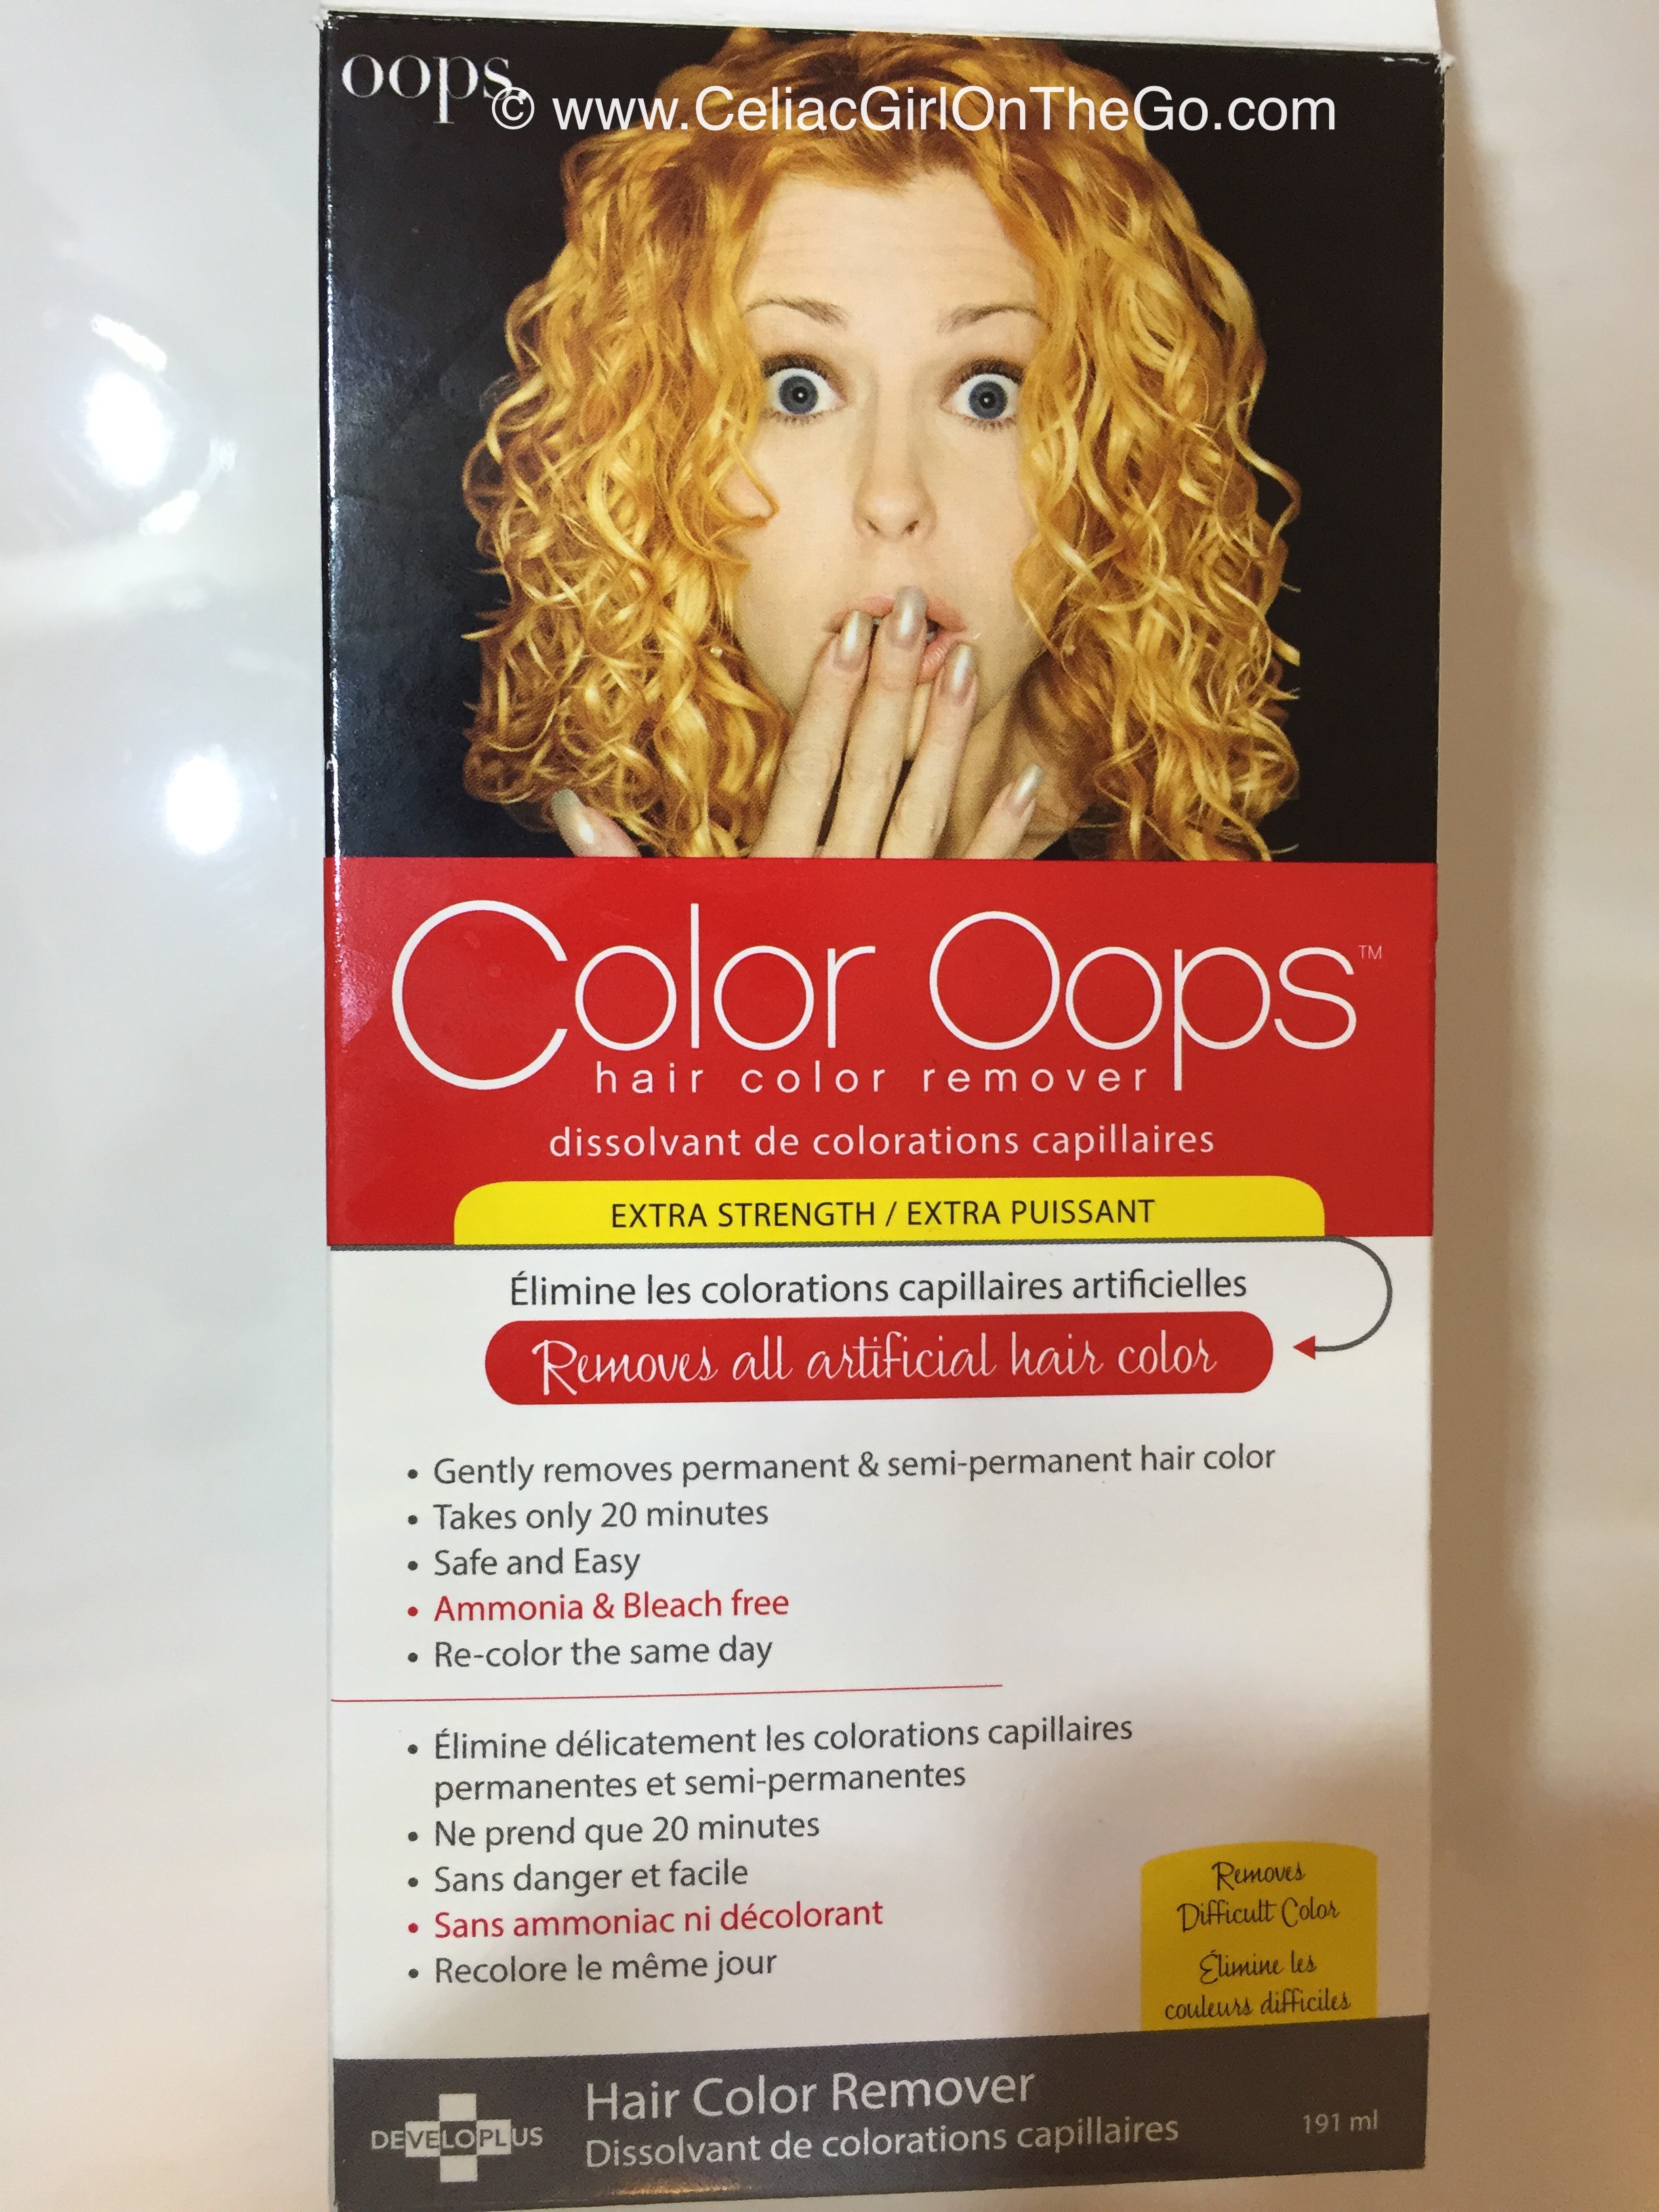 Color Oops – Haircolor Remover | Celiac Girl On The Go